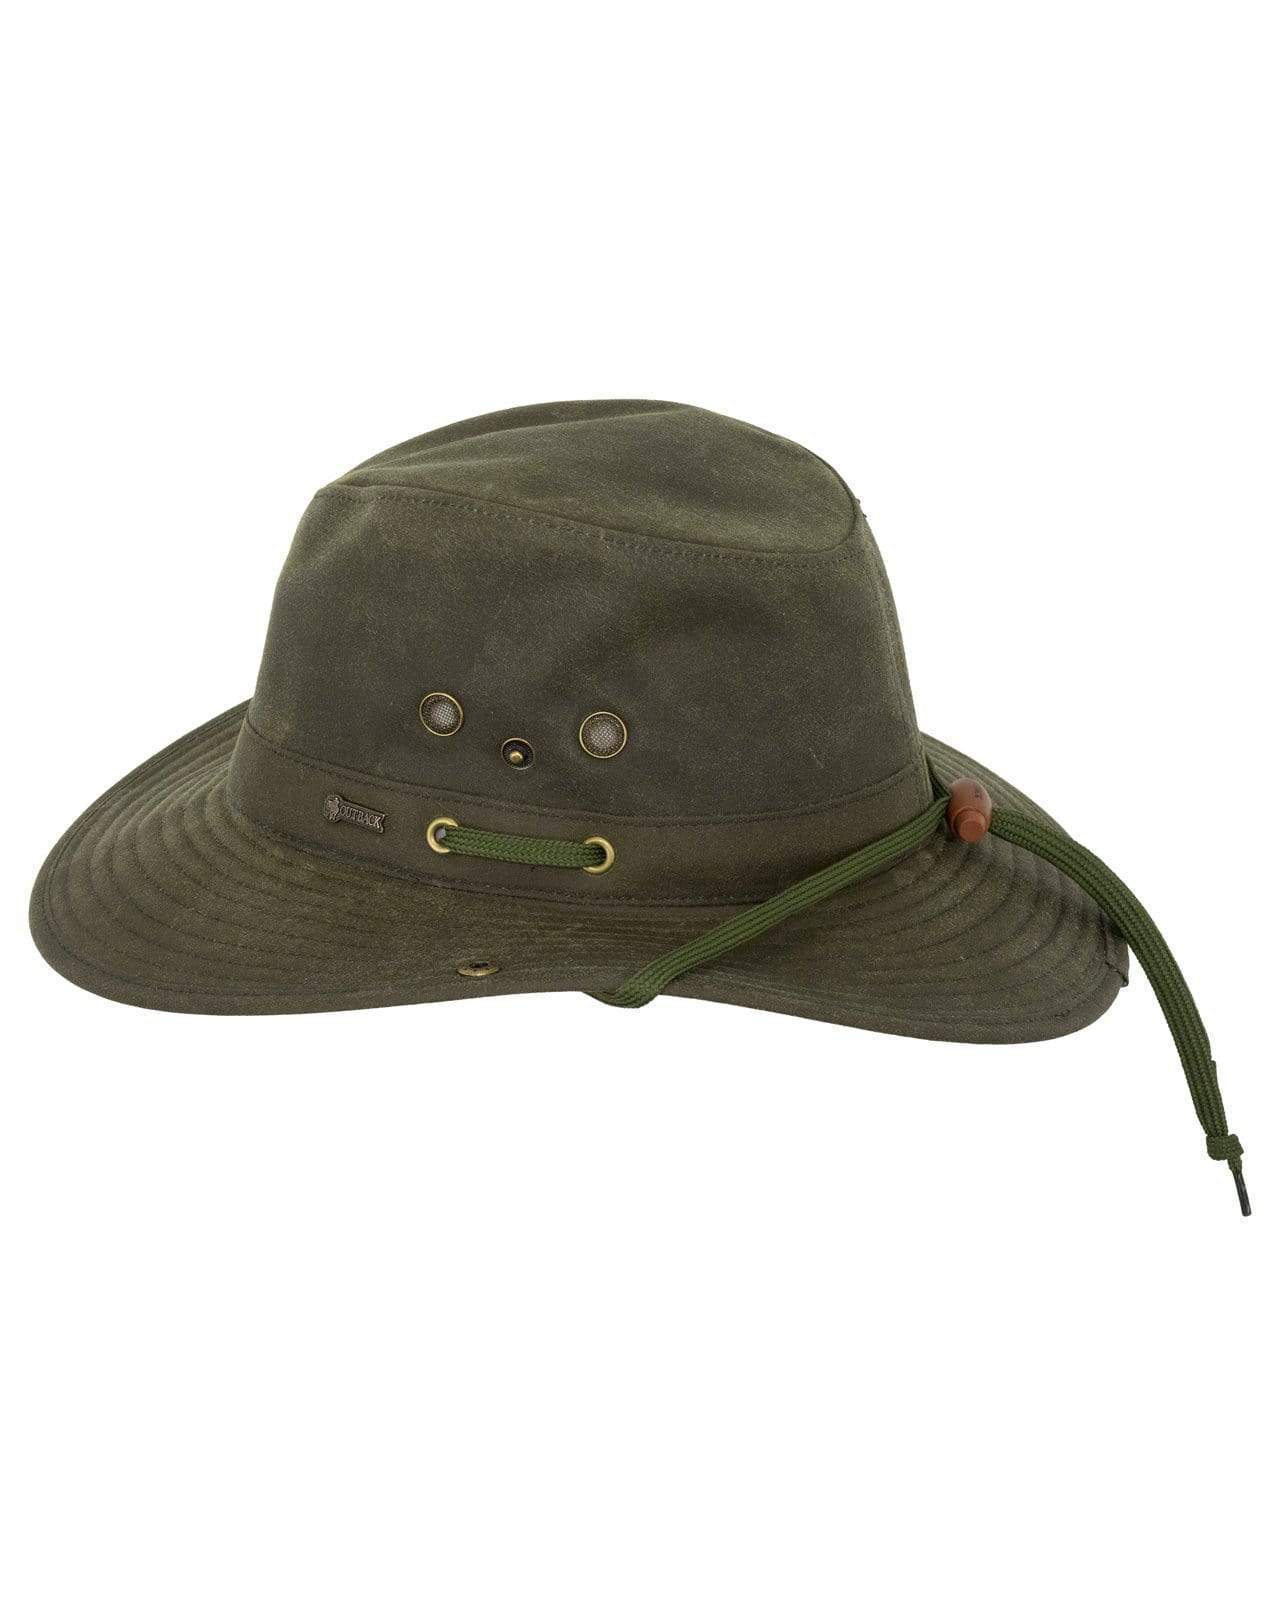 Outback Trading Company River Guide Hats